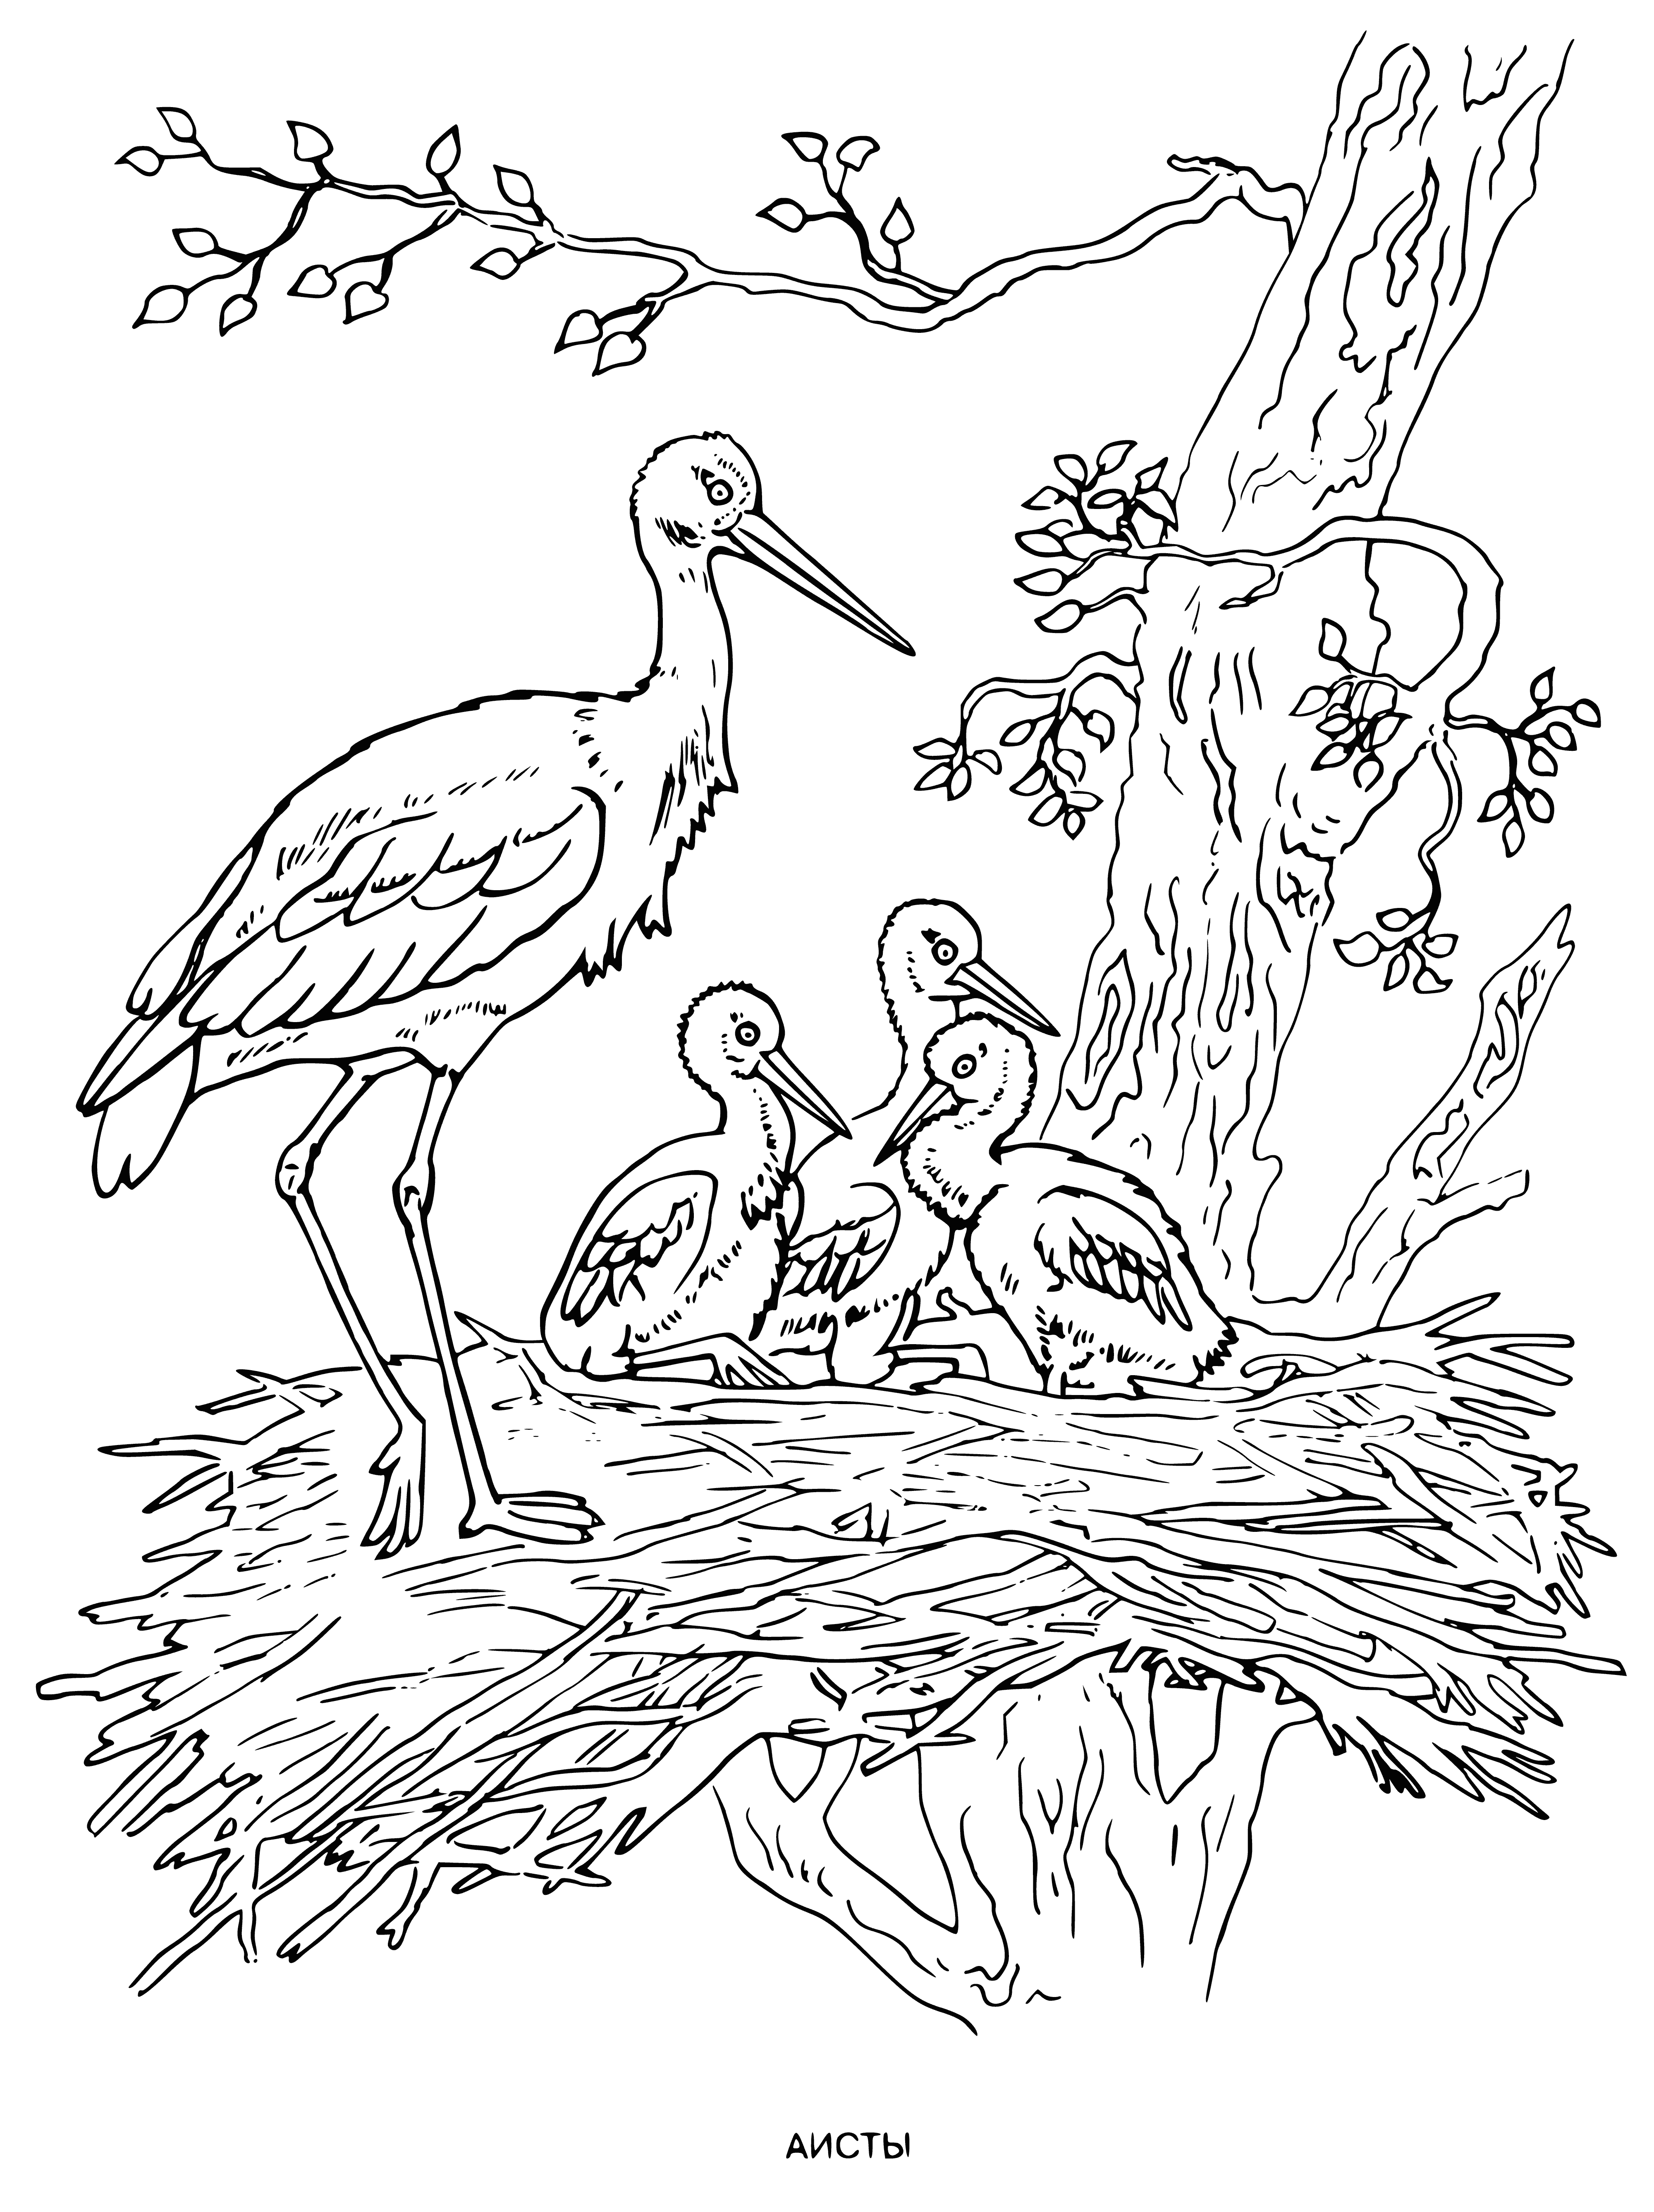 coloring page: Storks stand in line on a tree branch. White bodies, black wing tips, long curved beaks, and black eyes.